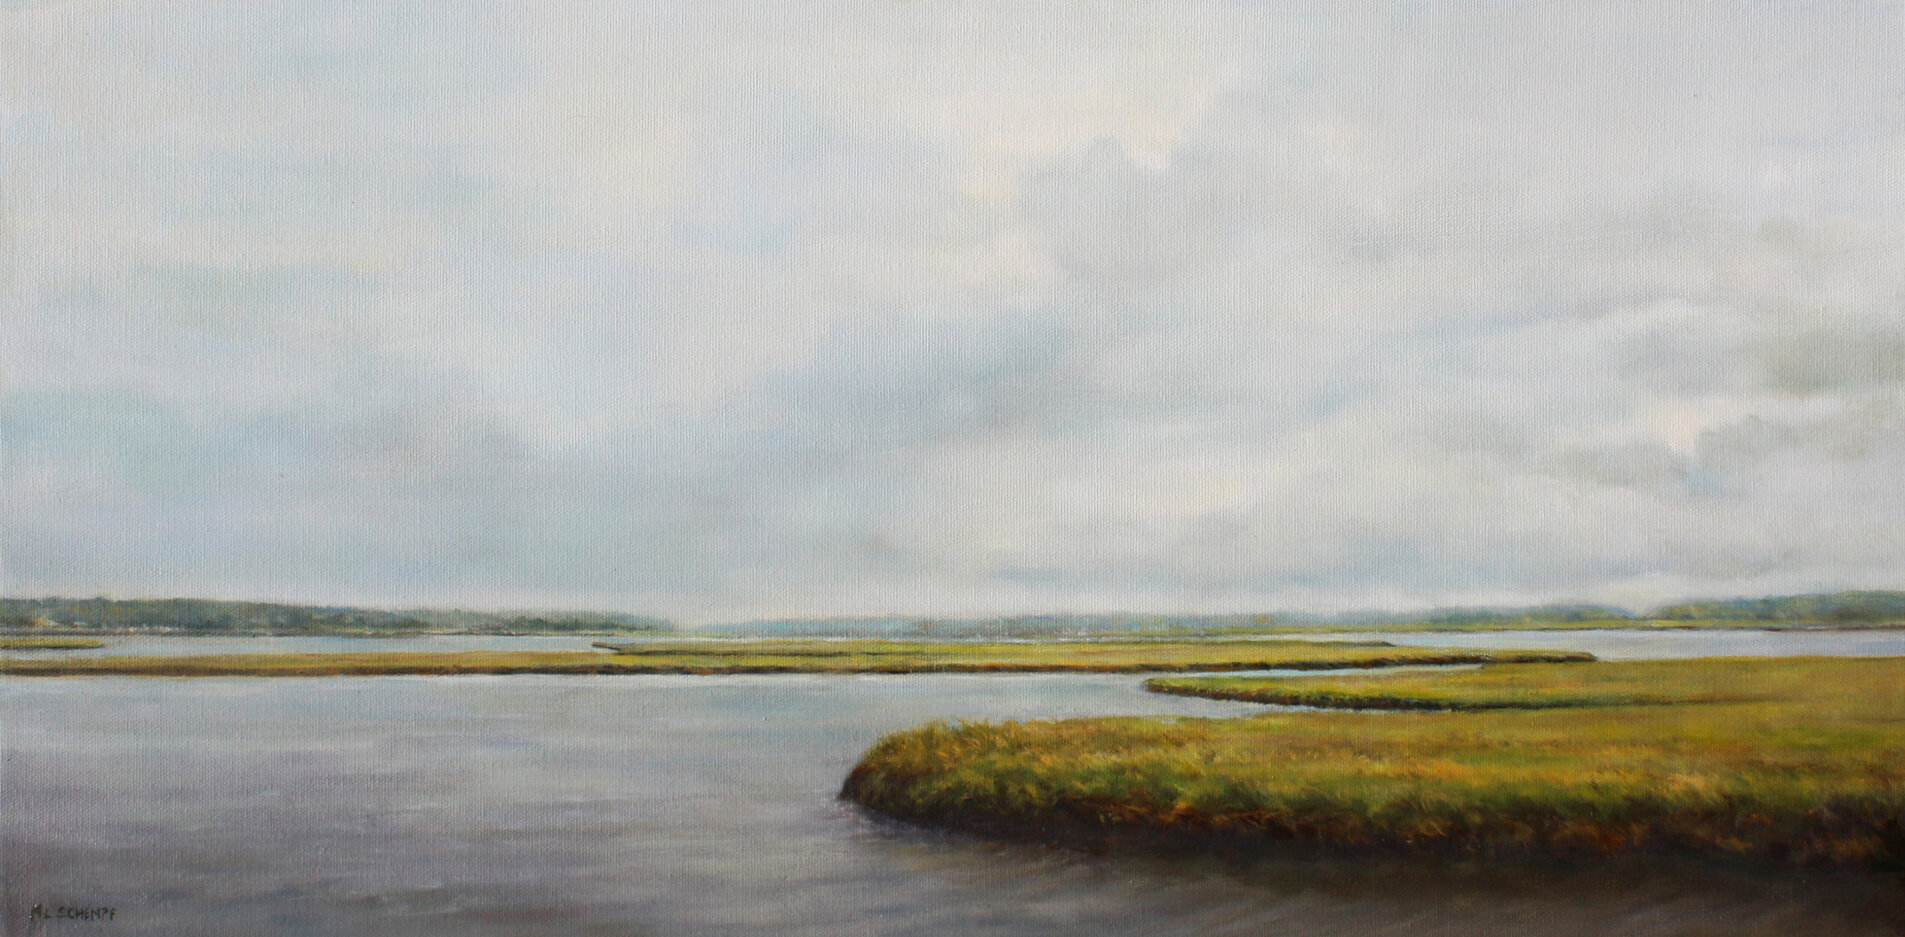  Mary Lou Schempf  Spring Marsh, Westport Mass,    12” x 24’”, oil on canvas  (available)  